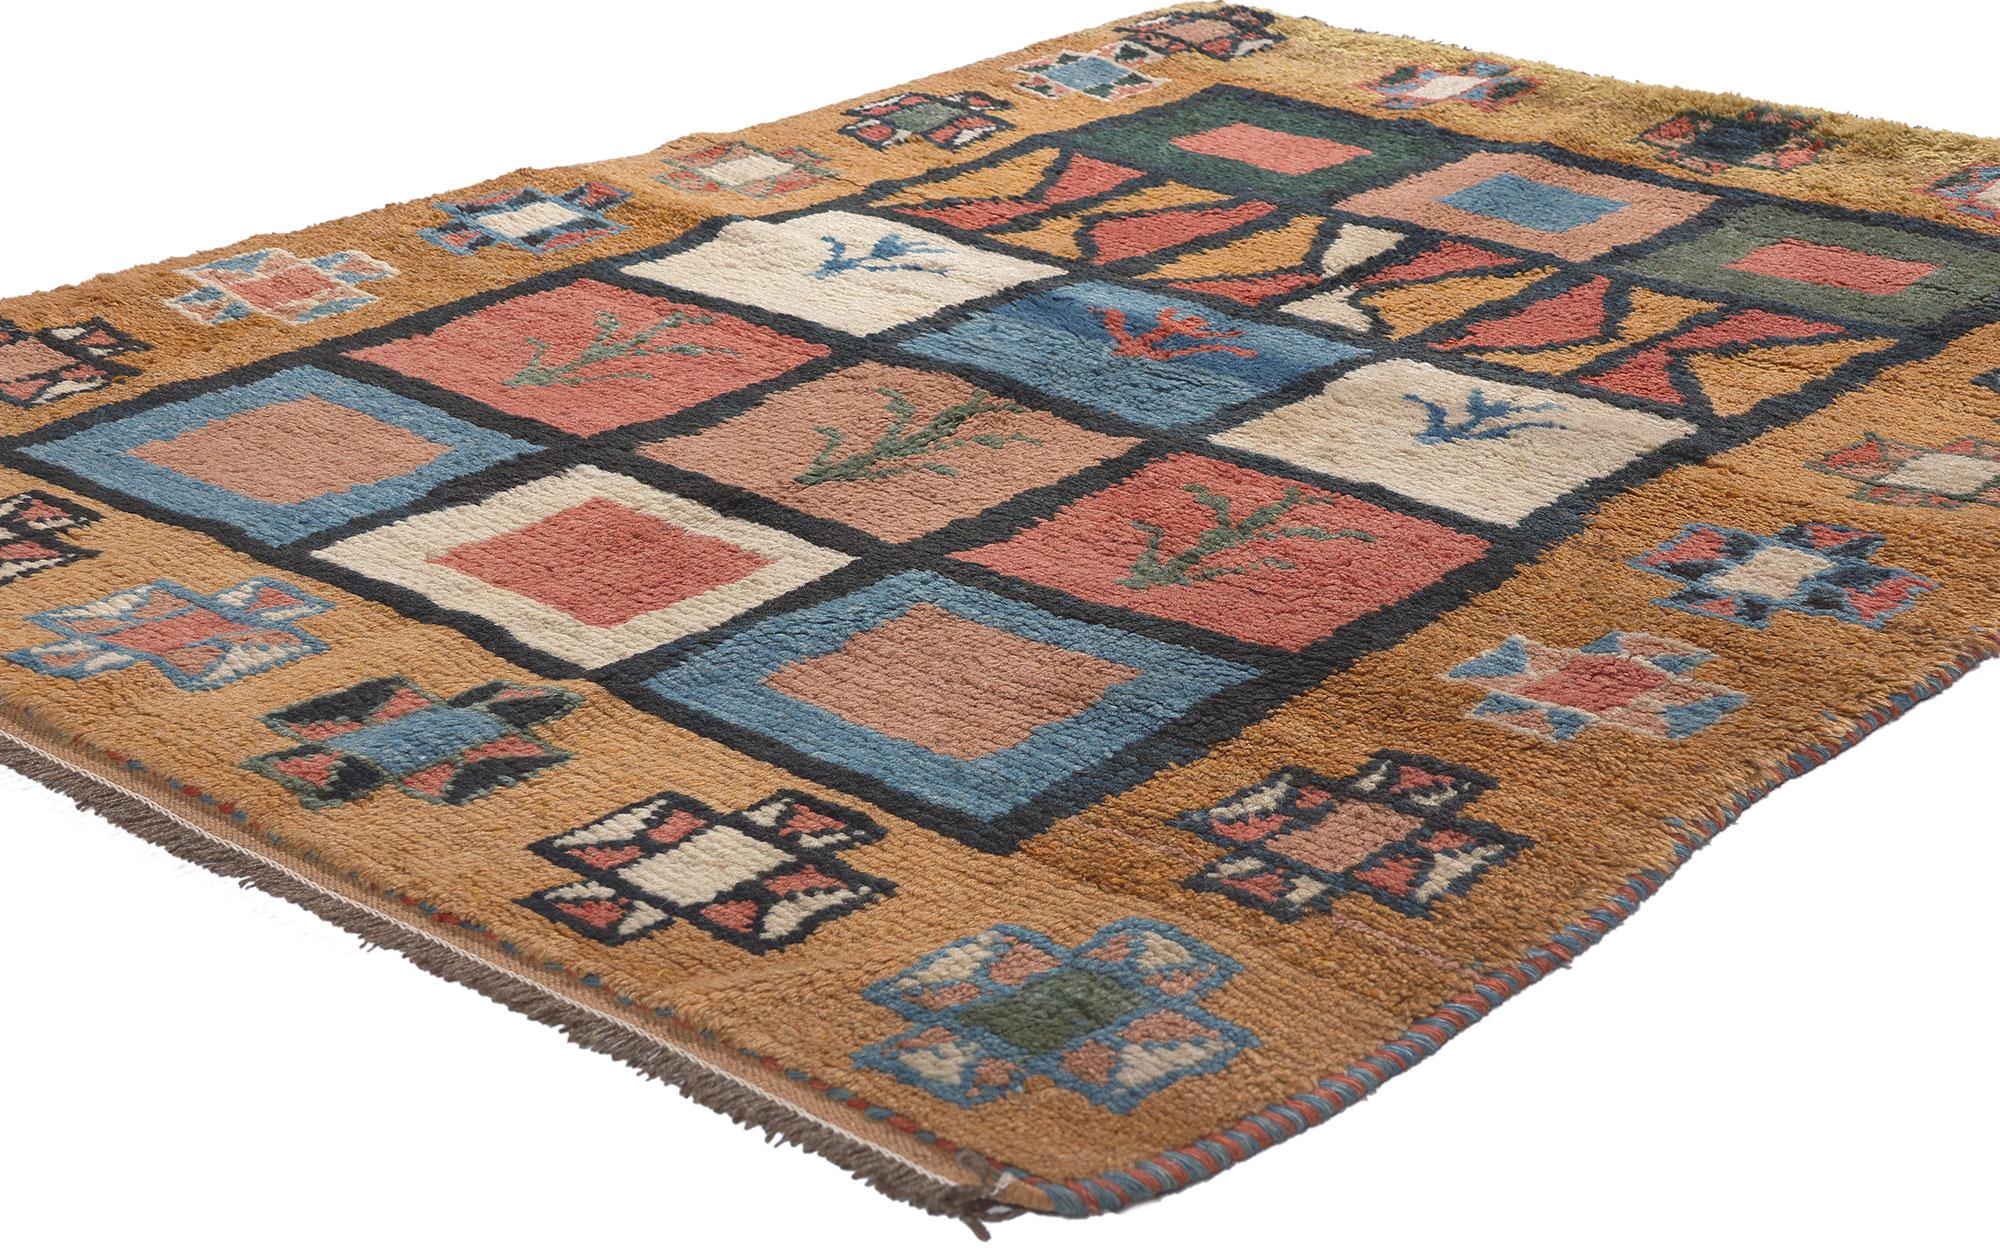 61247 Vintage Persian Shiraz Rug, 03'07 x 04'11.
Emanating nomadic charm with incredible detail and texture, this hand knotted wool vintage Persian Shiraz rug is a captivating vision of woven beauty. The tribal check pattern and earthy colorway